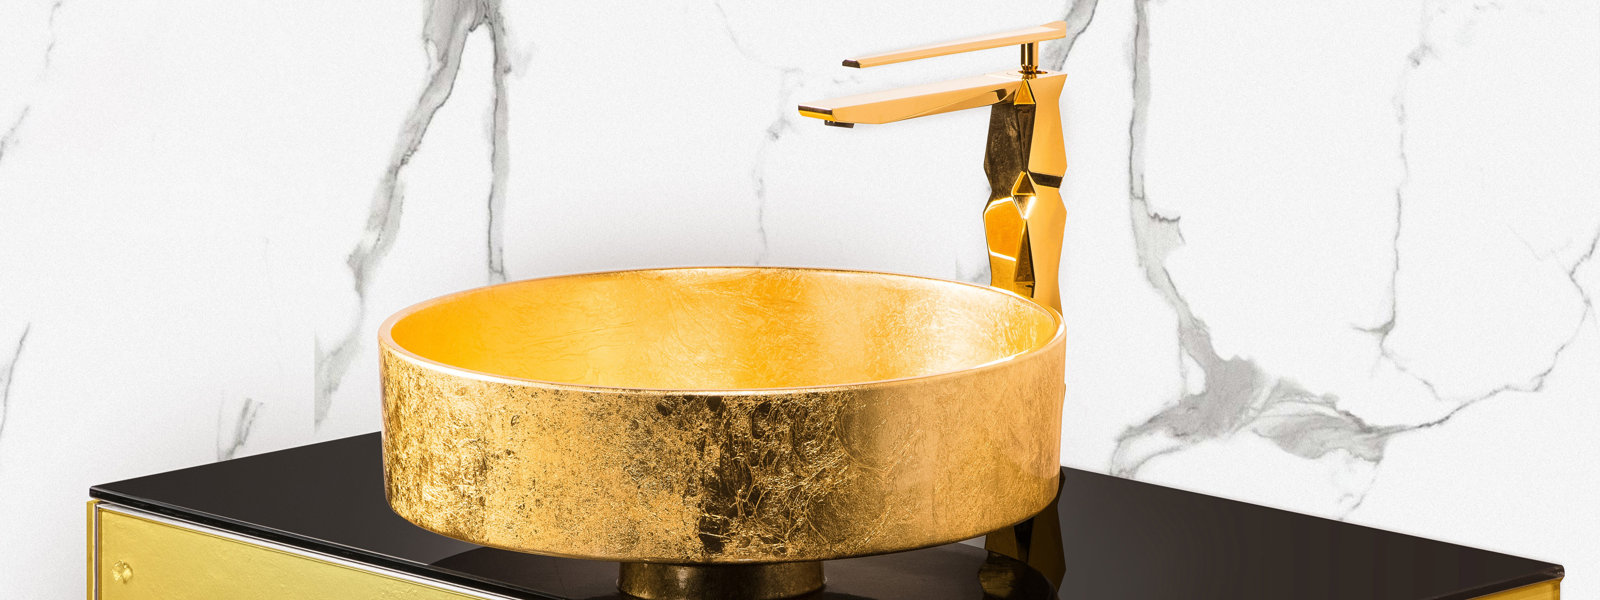 Fine Fixtures Dual-Flush Elongated One-Piece Toilet with High Efficiency  Flush in Shiny Gold 